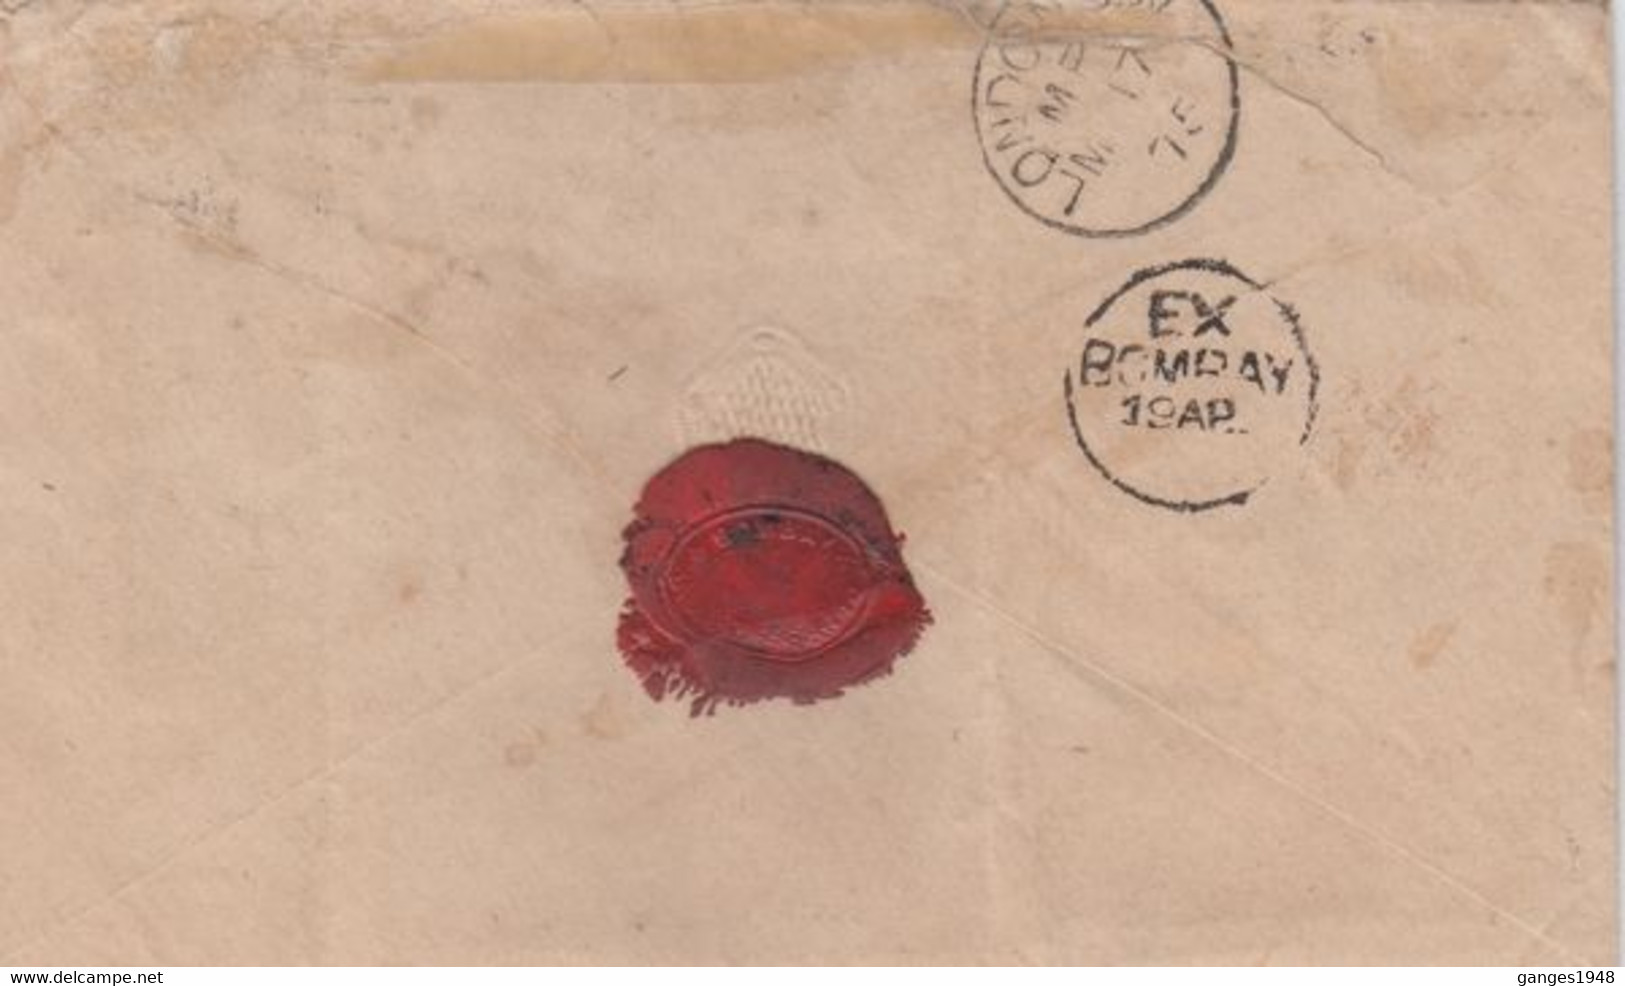 1875  QV  12A  Franked Cover 1 Stamp Removed  GIRGAUM Bombay  W C / 4  Local Canc To London   #  26228 D  Inde  Indien - 1854 Britische Indien-Kompanie